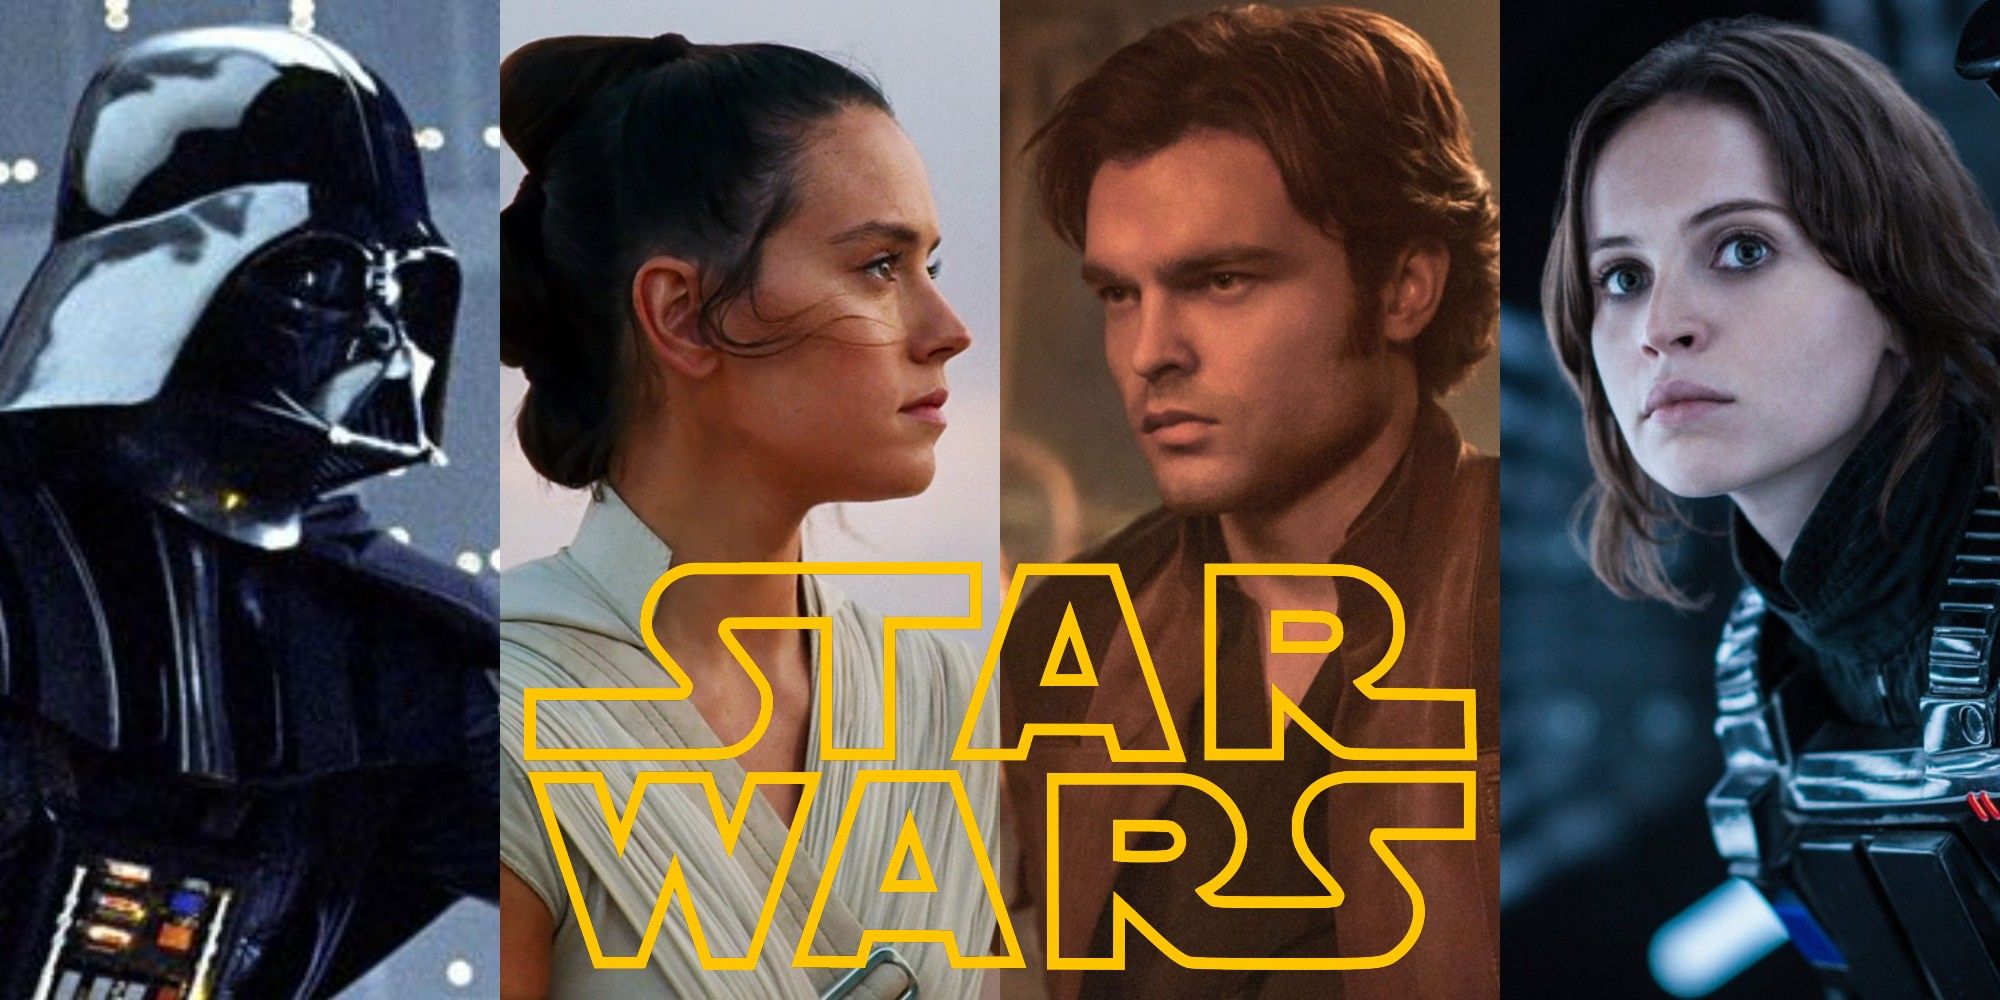 Split image of Darth Vader, Rey, Young Han Solo and Jyn Erso from Star Wars movies with the franchise logo on top